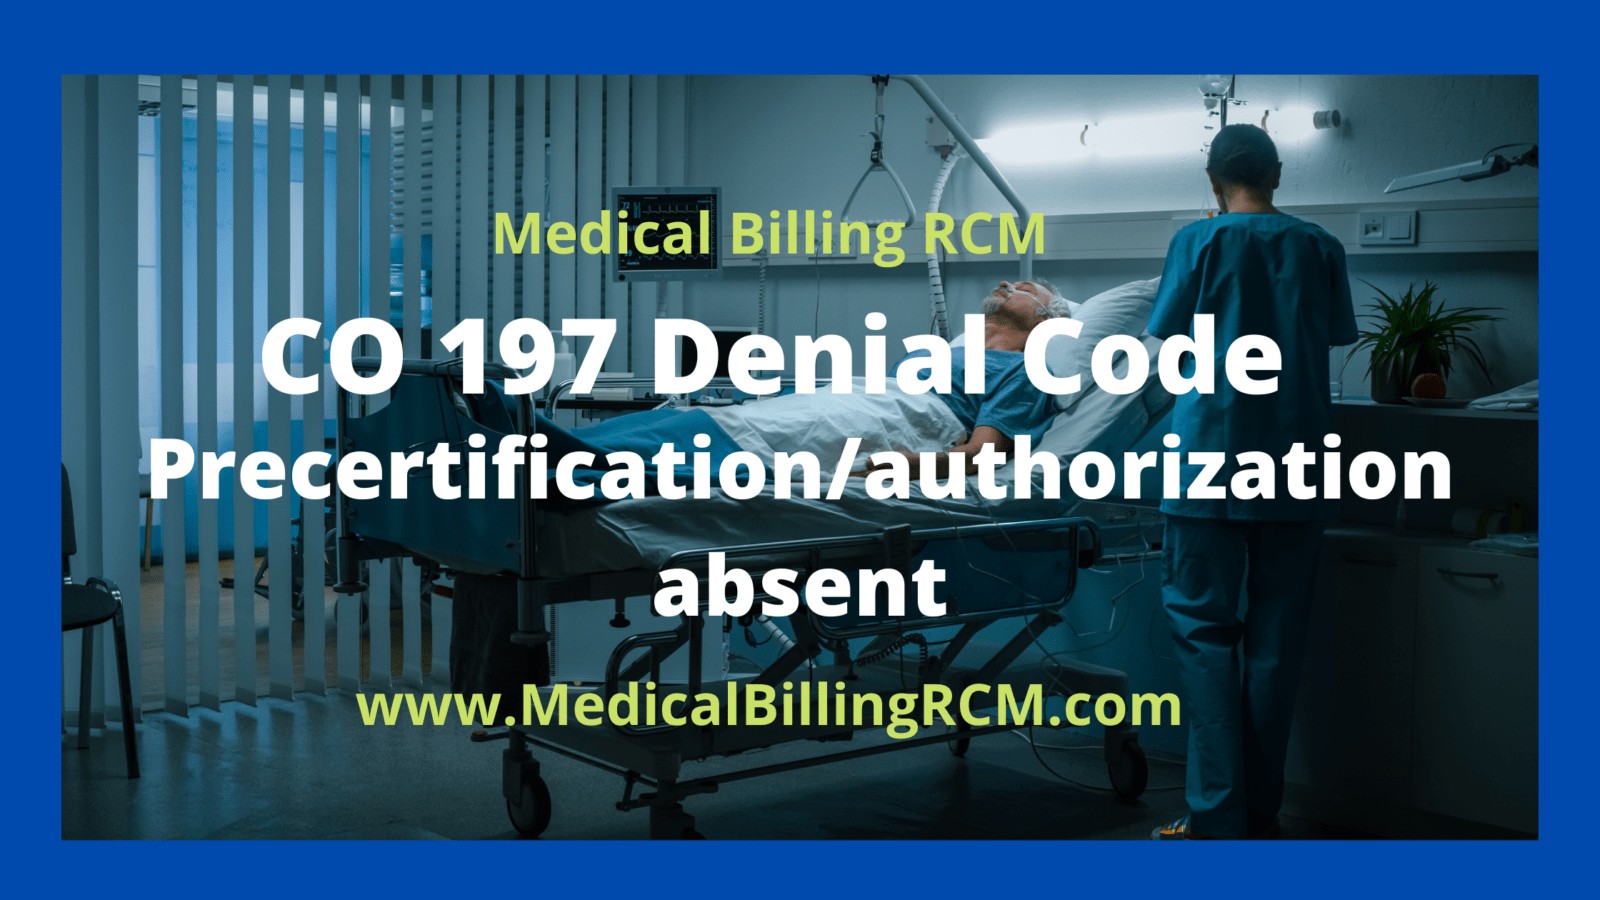 co 197 denial code meaning and description